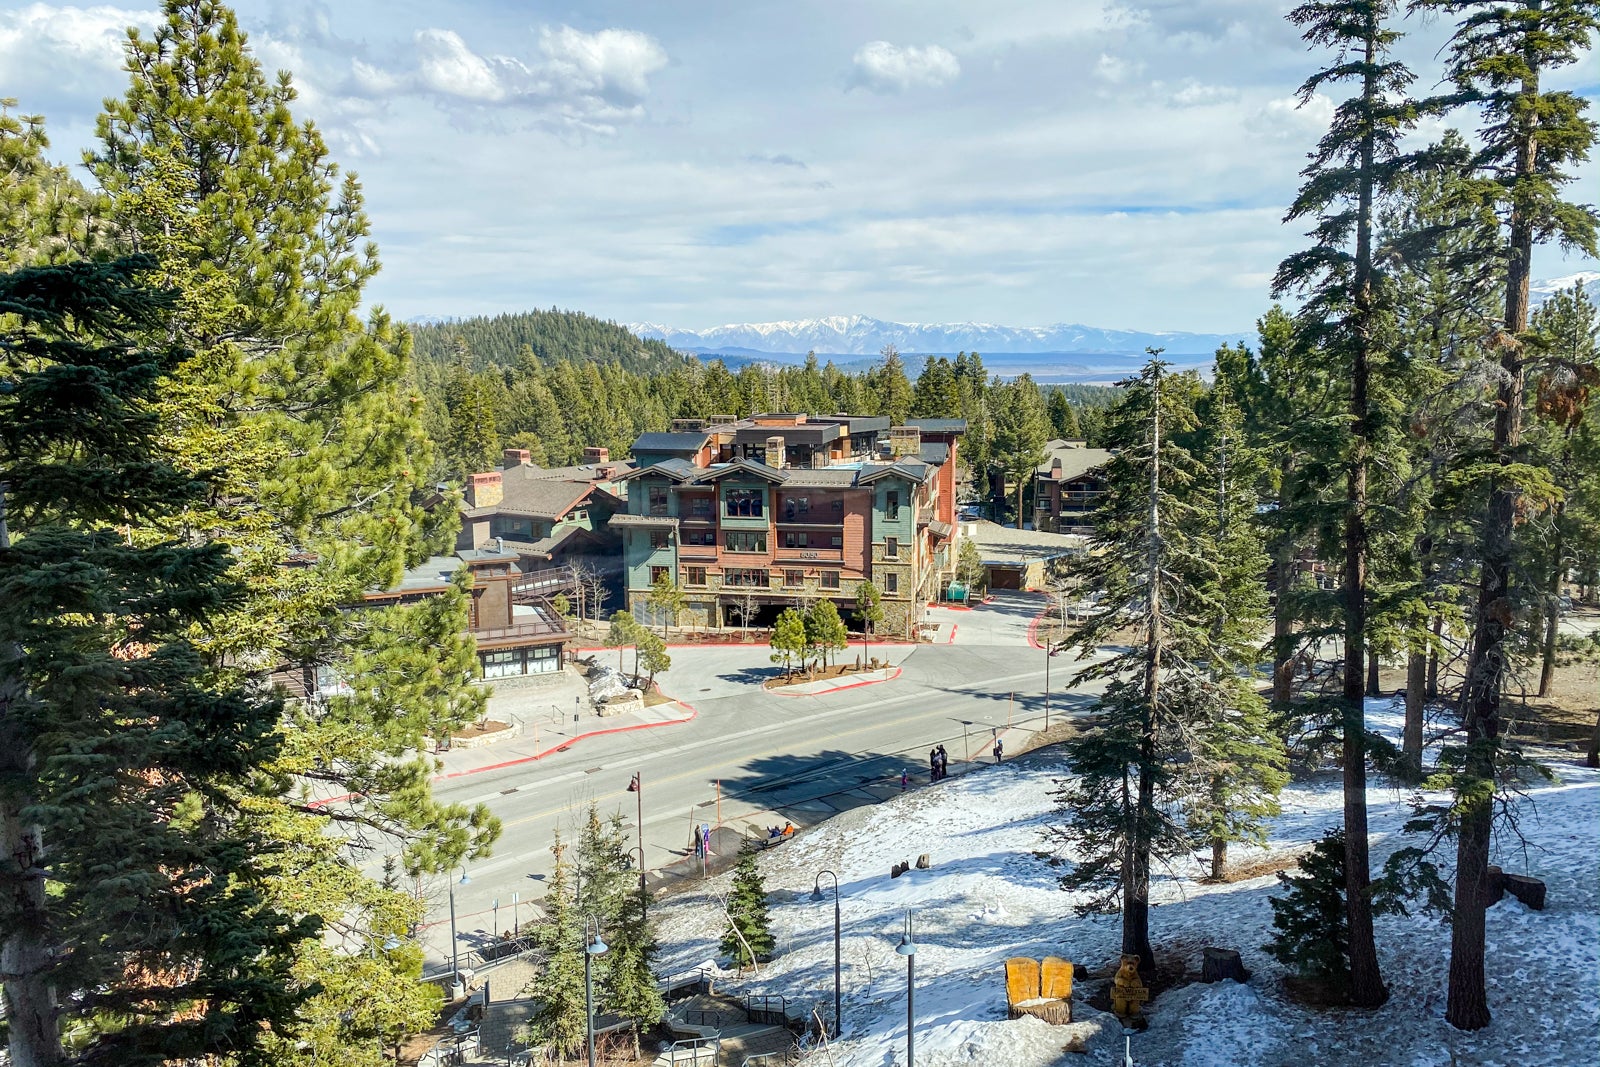 Long shot of Westin Mammoth with snow and trees